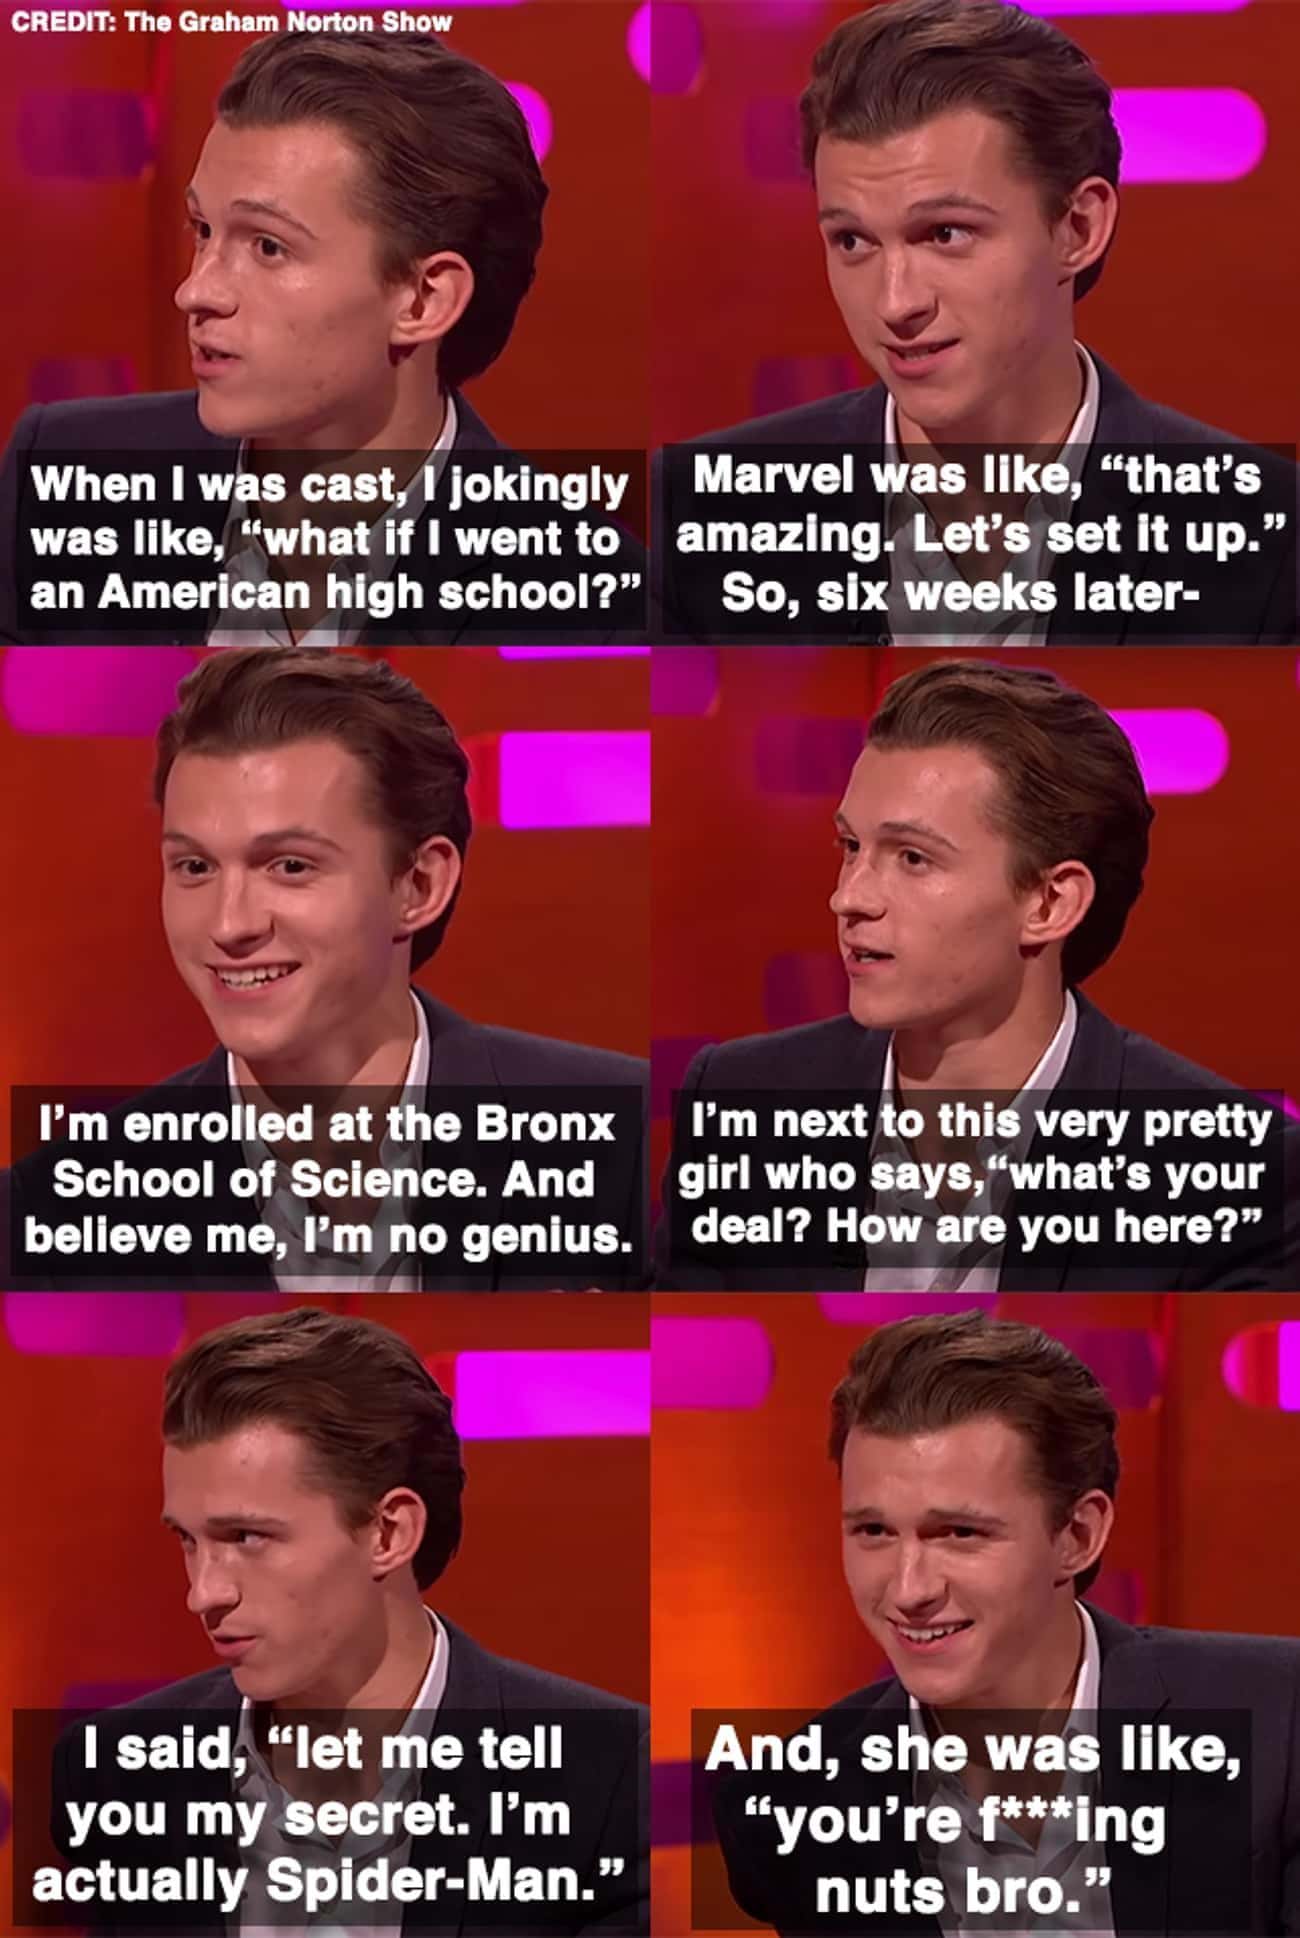 21 Hilarious Celebrity Interview Moments From The UK's Funniest Talk Show